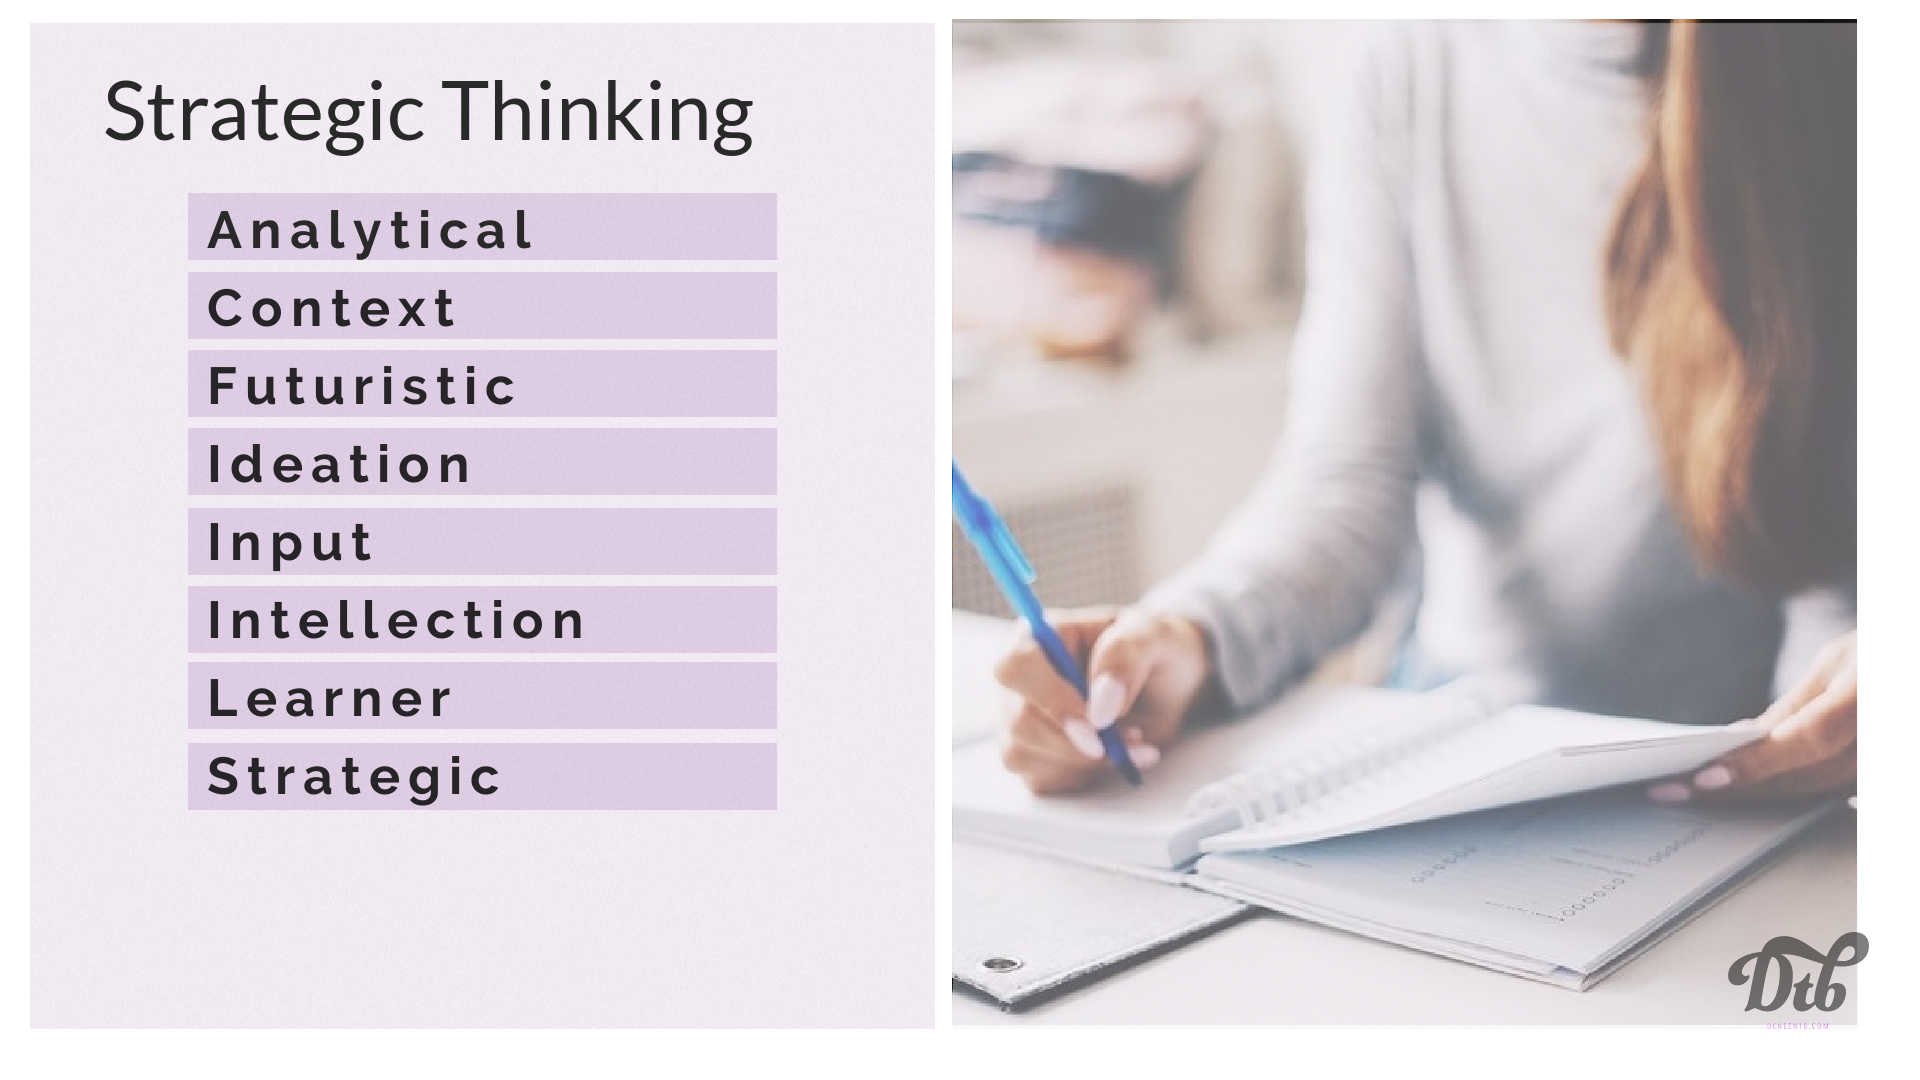 A list of strategic thinking strengths